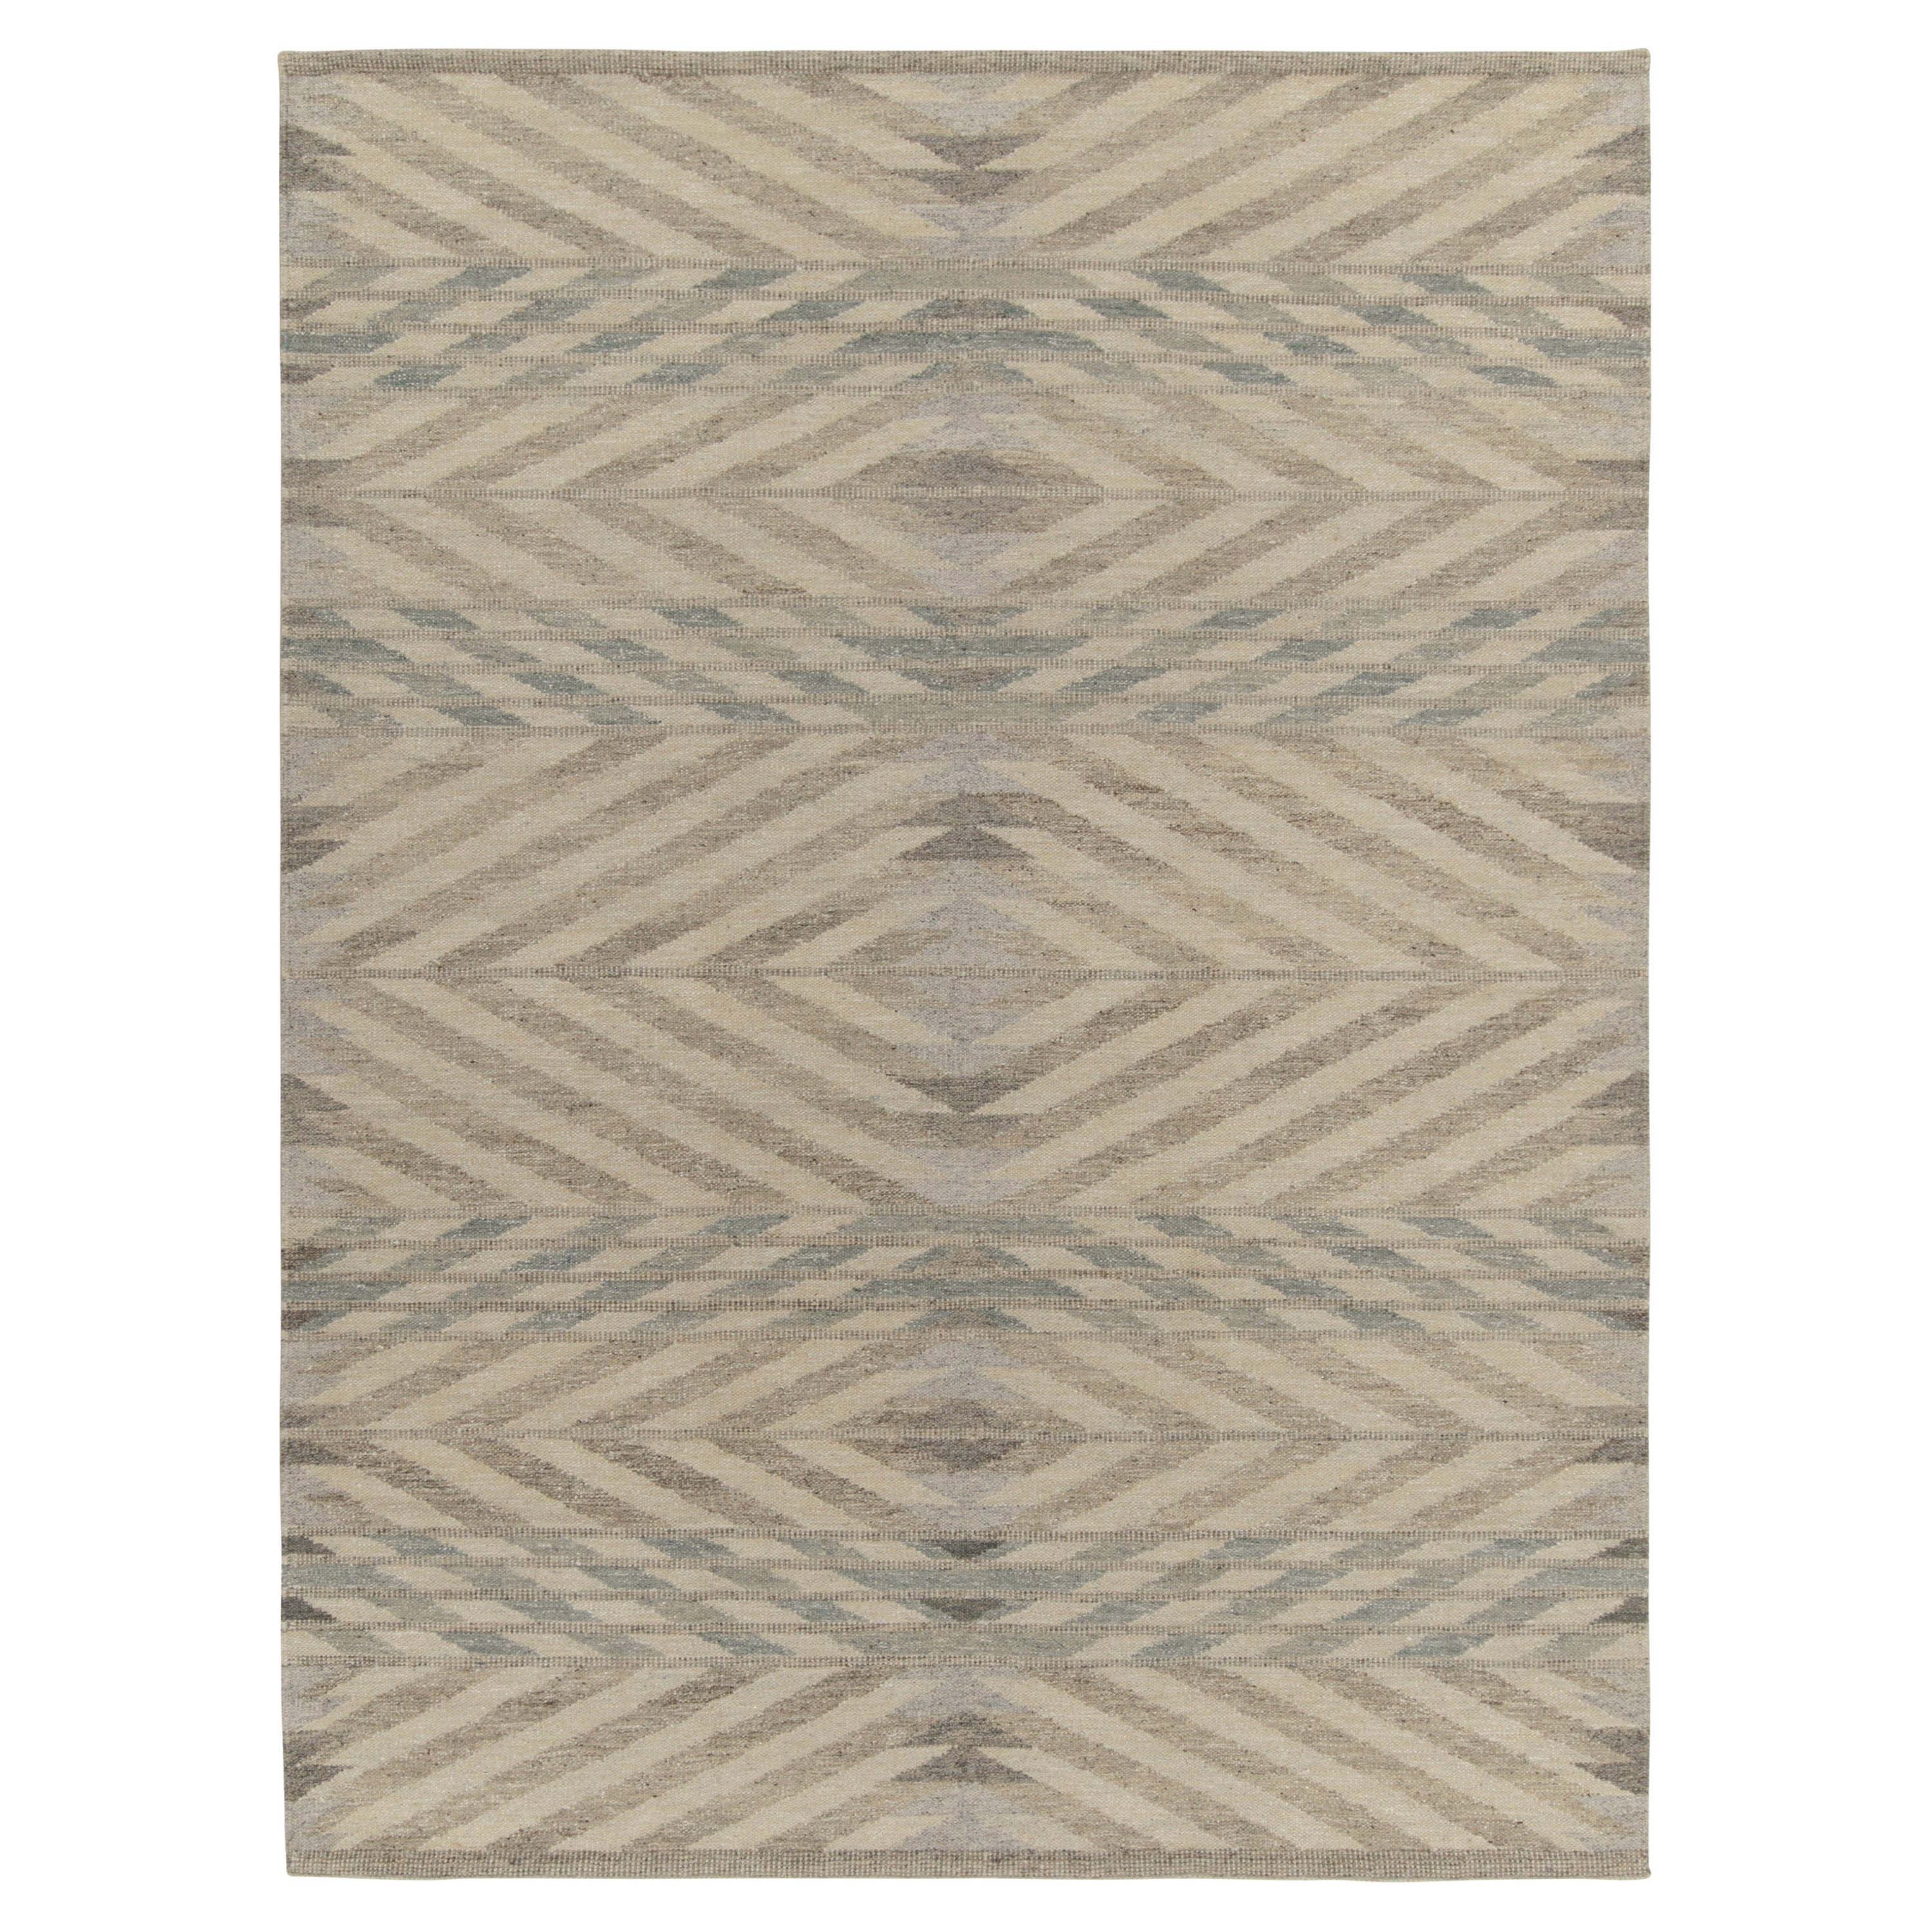 Rug & Kilim’s Scandinavian Style Kilim in Beige-Brown and Blue Chevrons For Sale